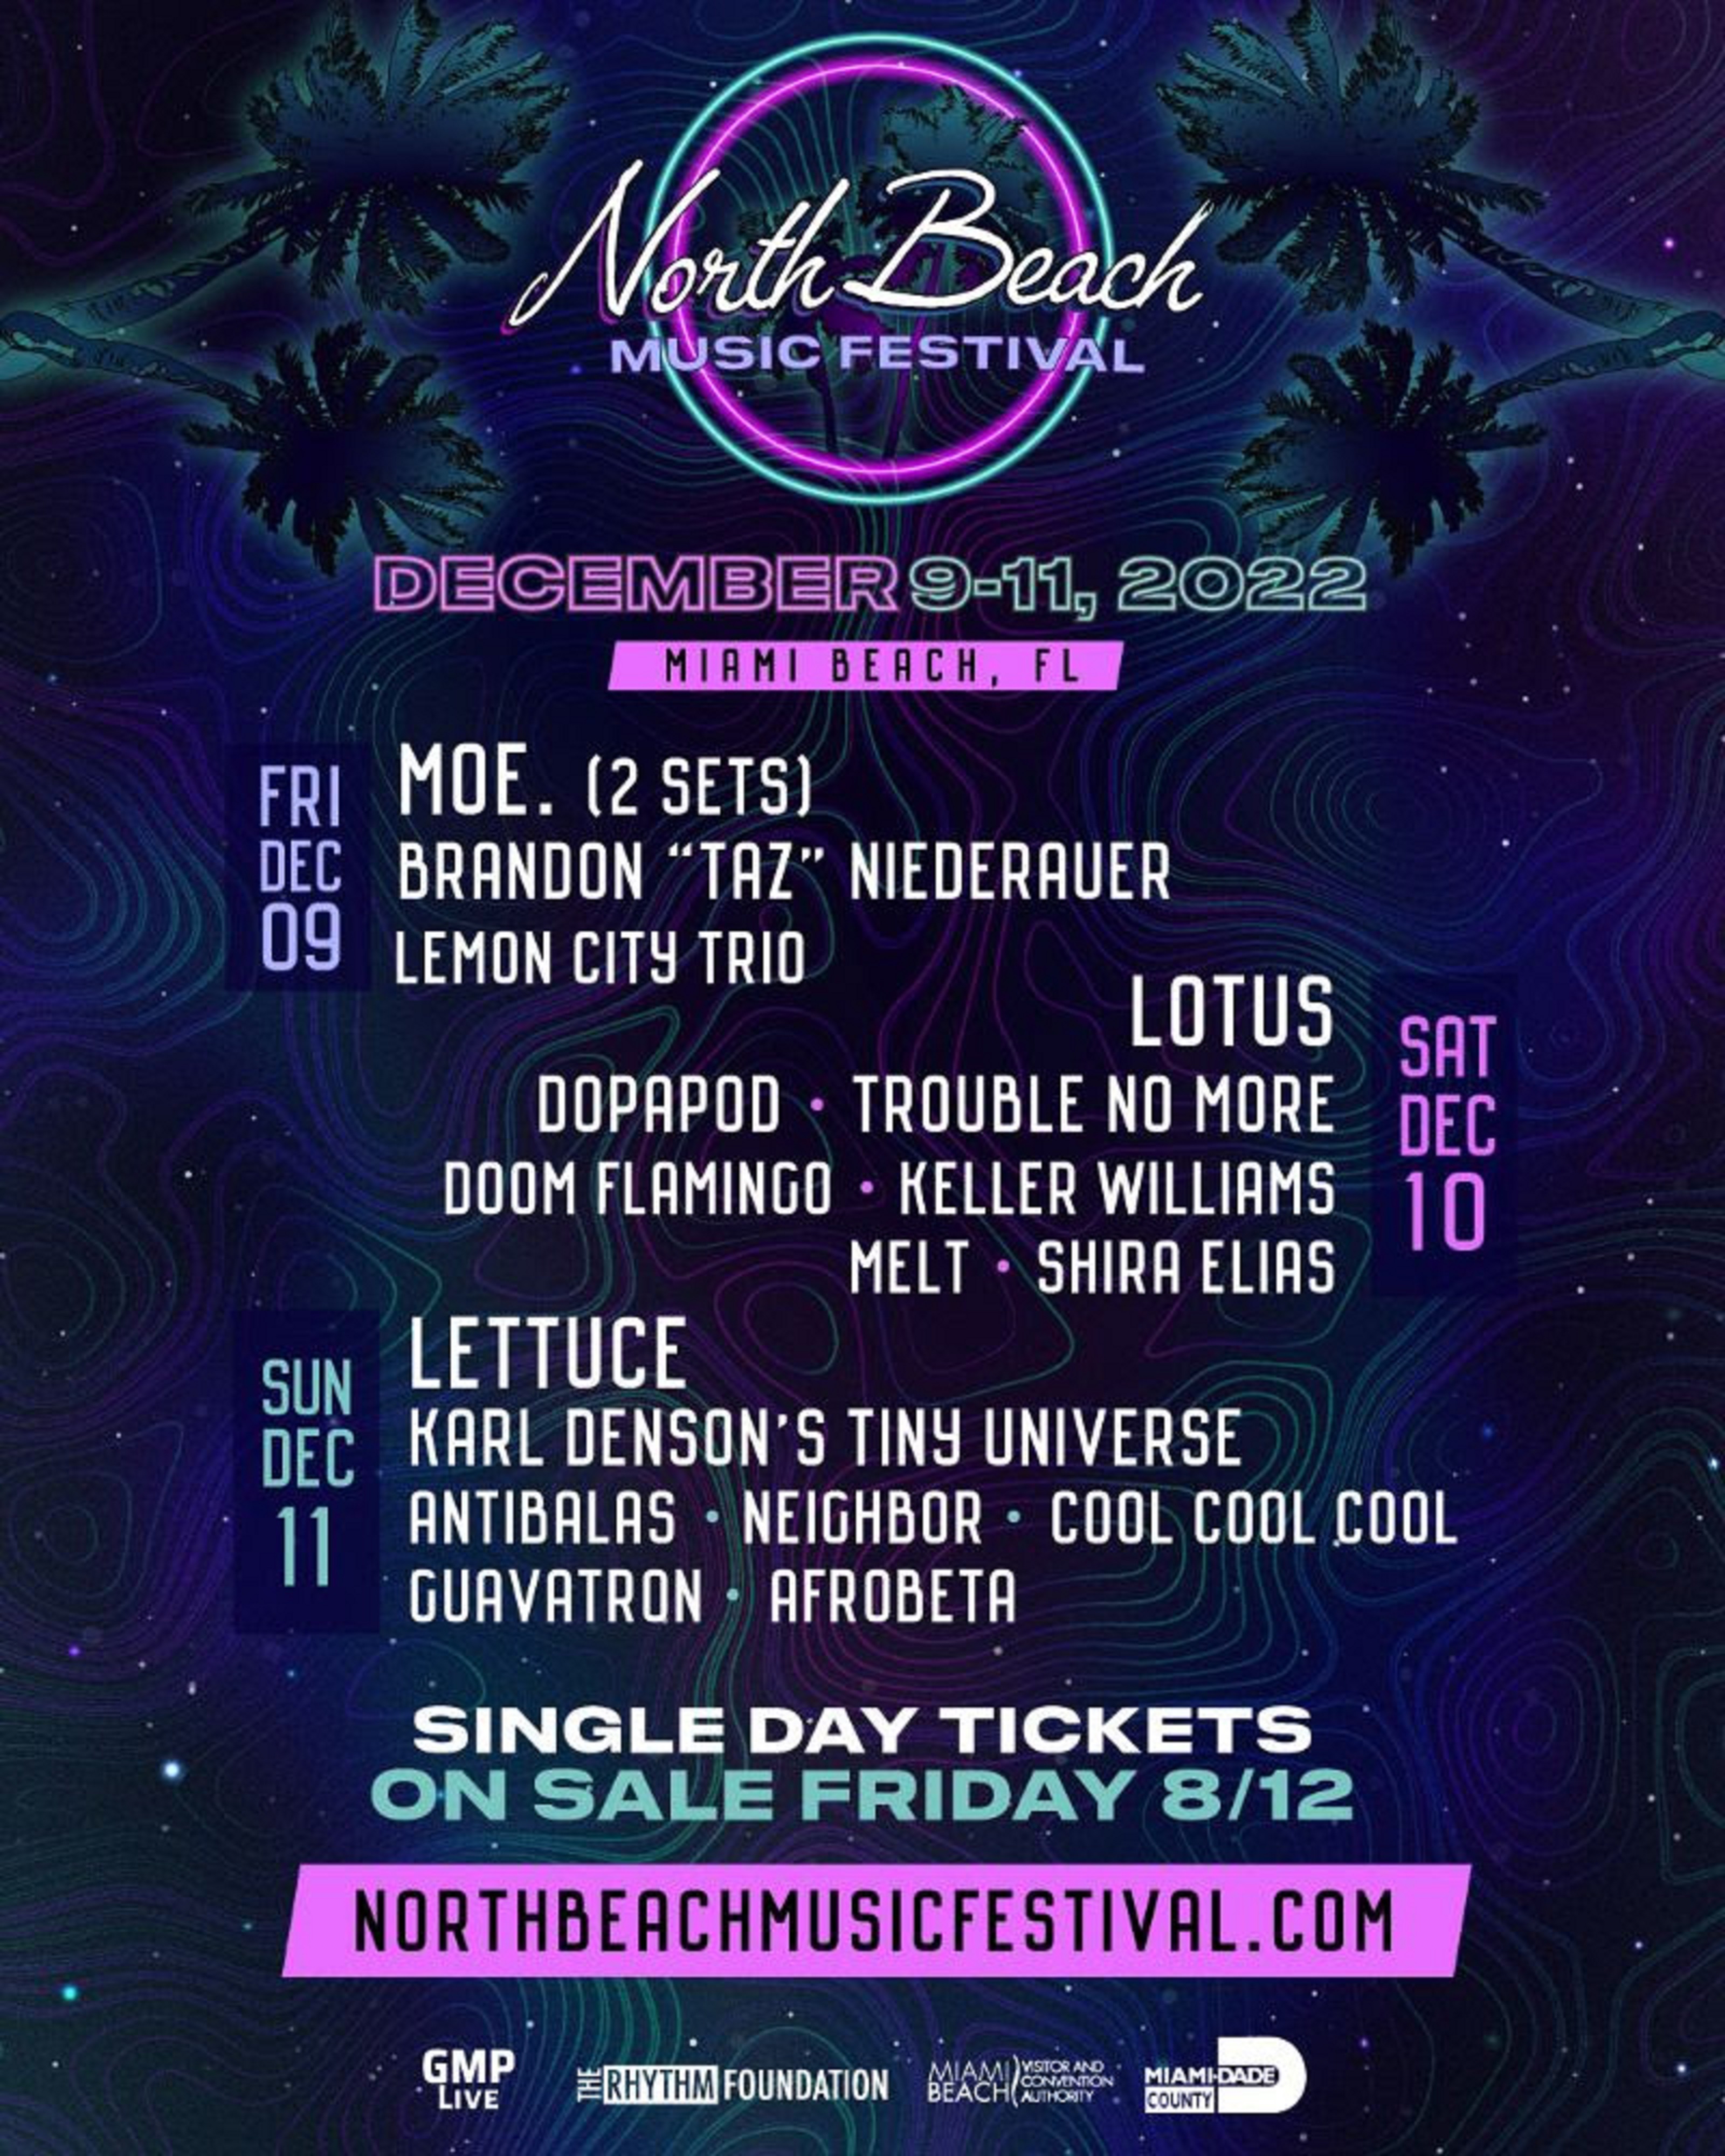 North Beach Music Festival Drops Daily Lineups & Ticket Options